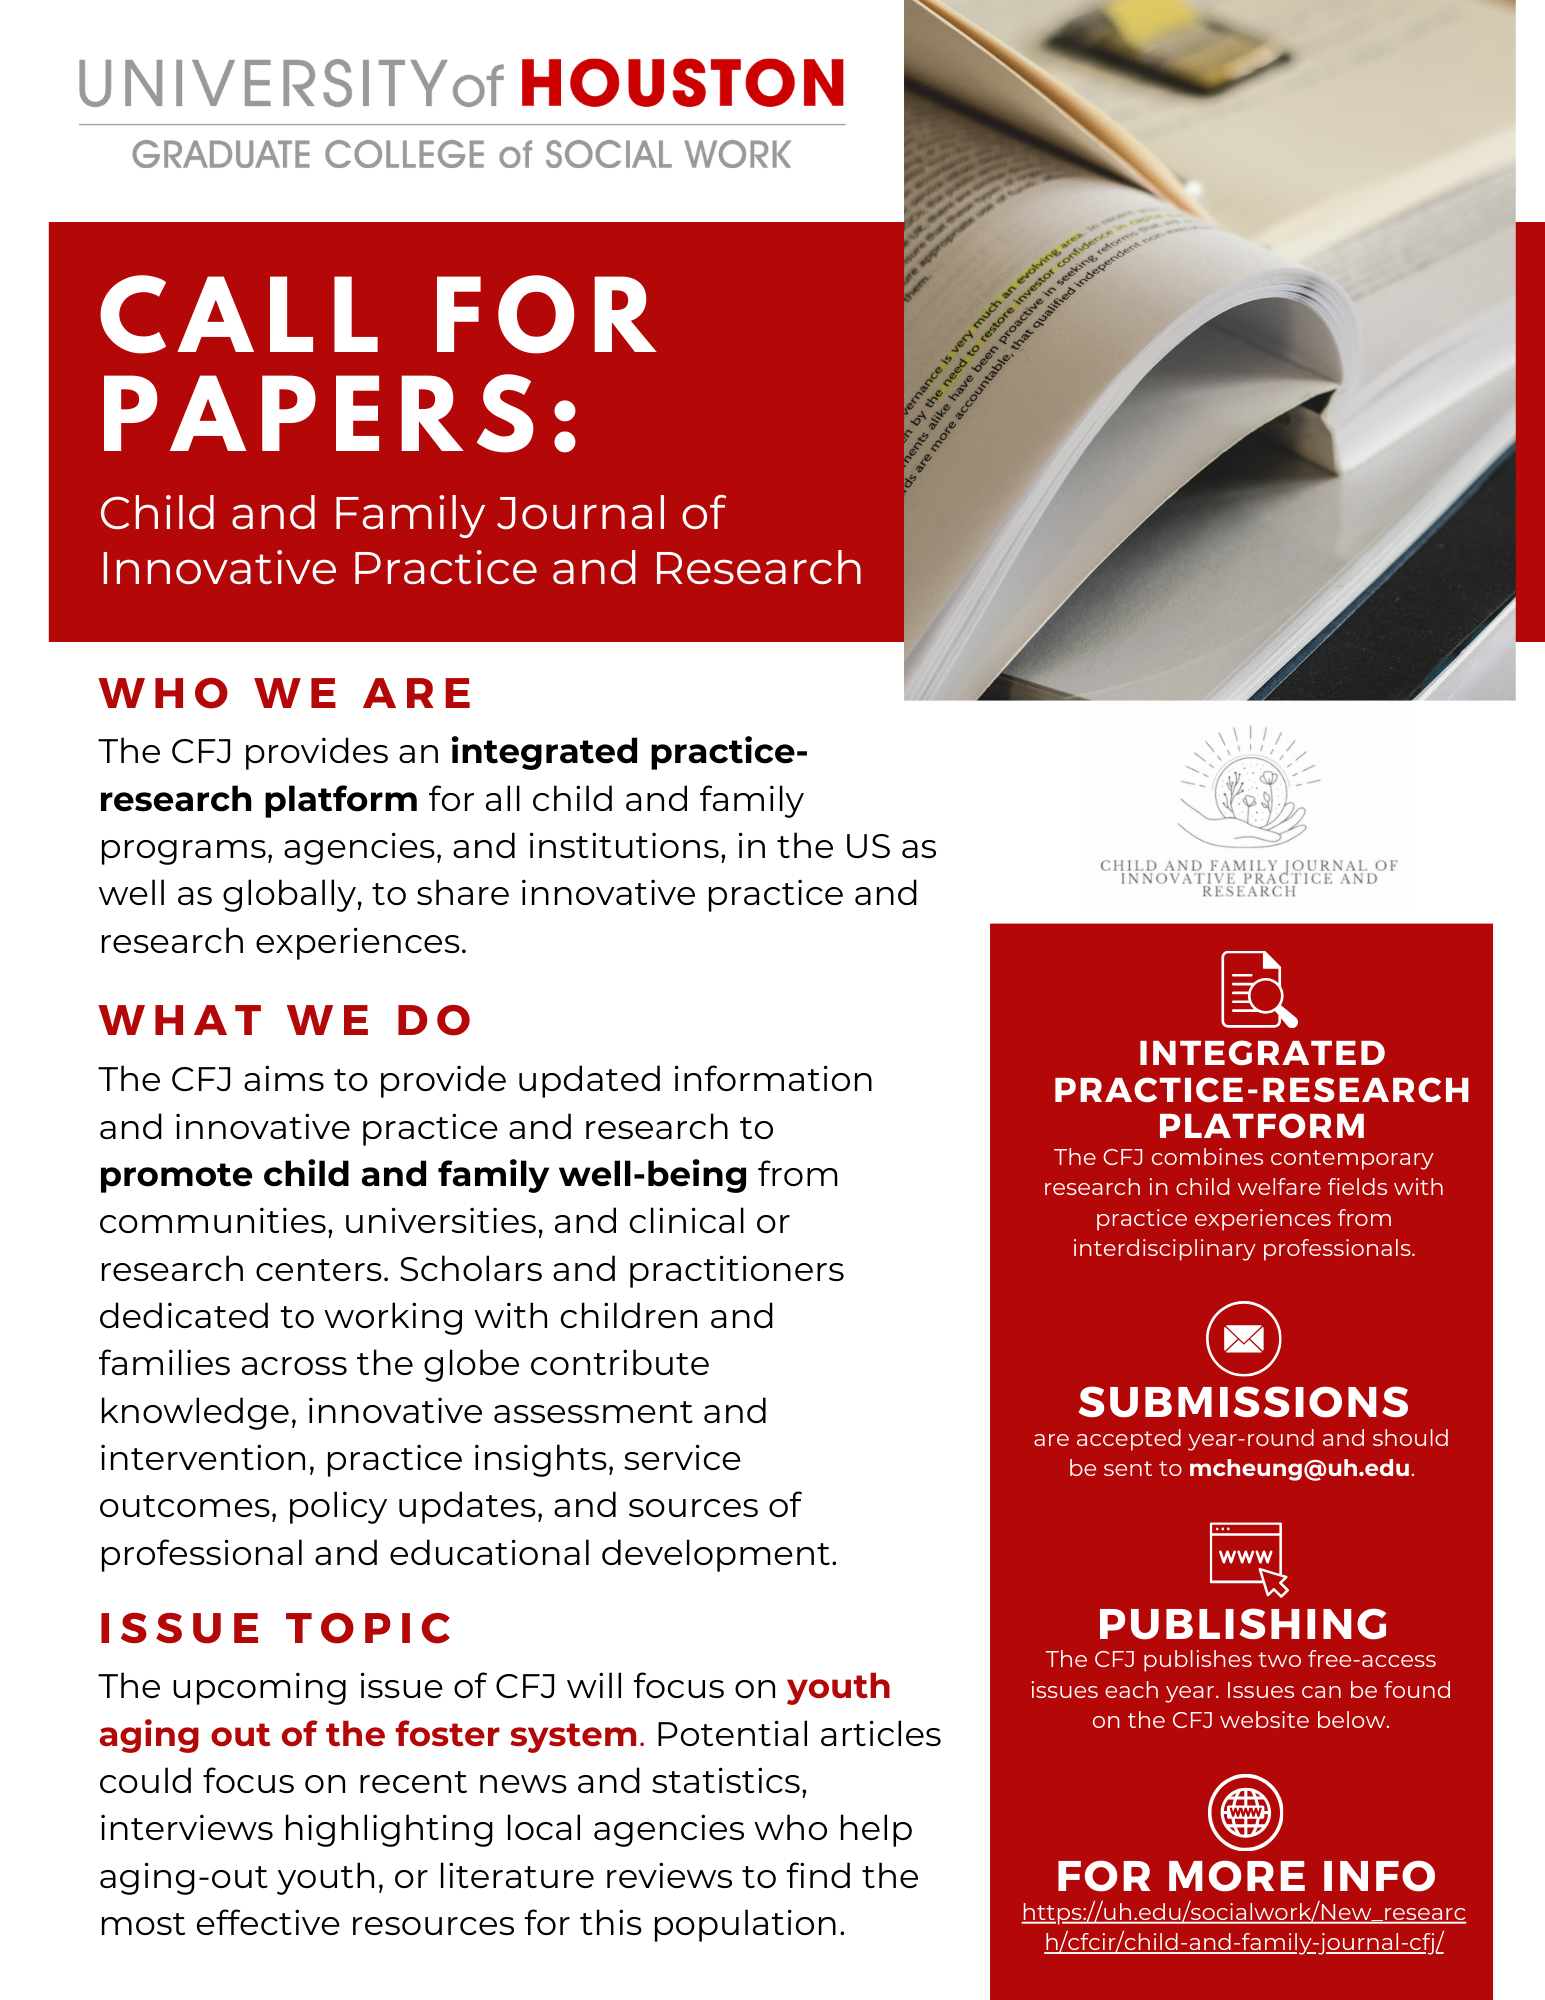 Call for papers image